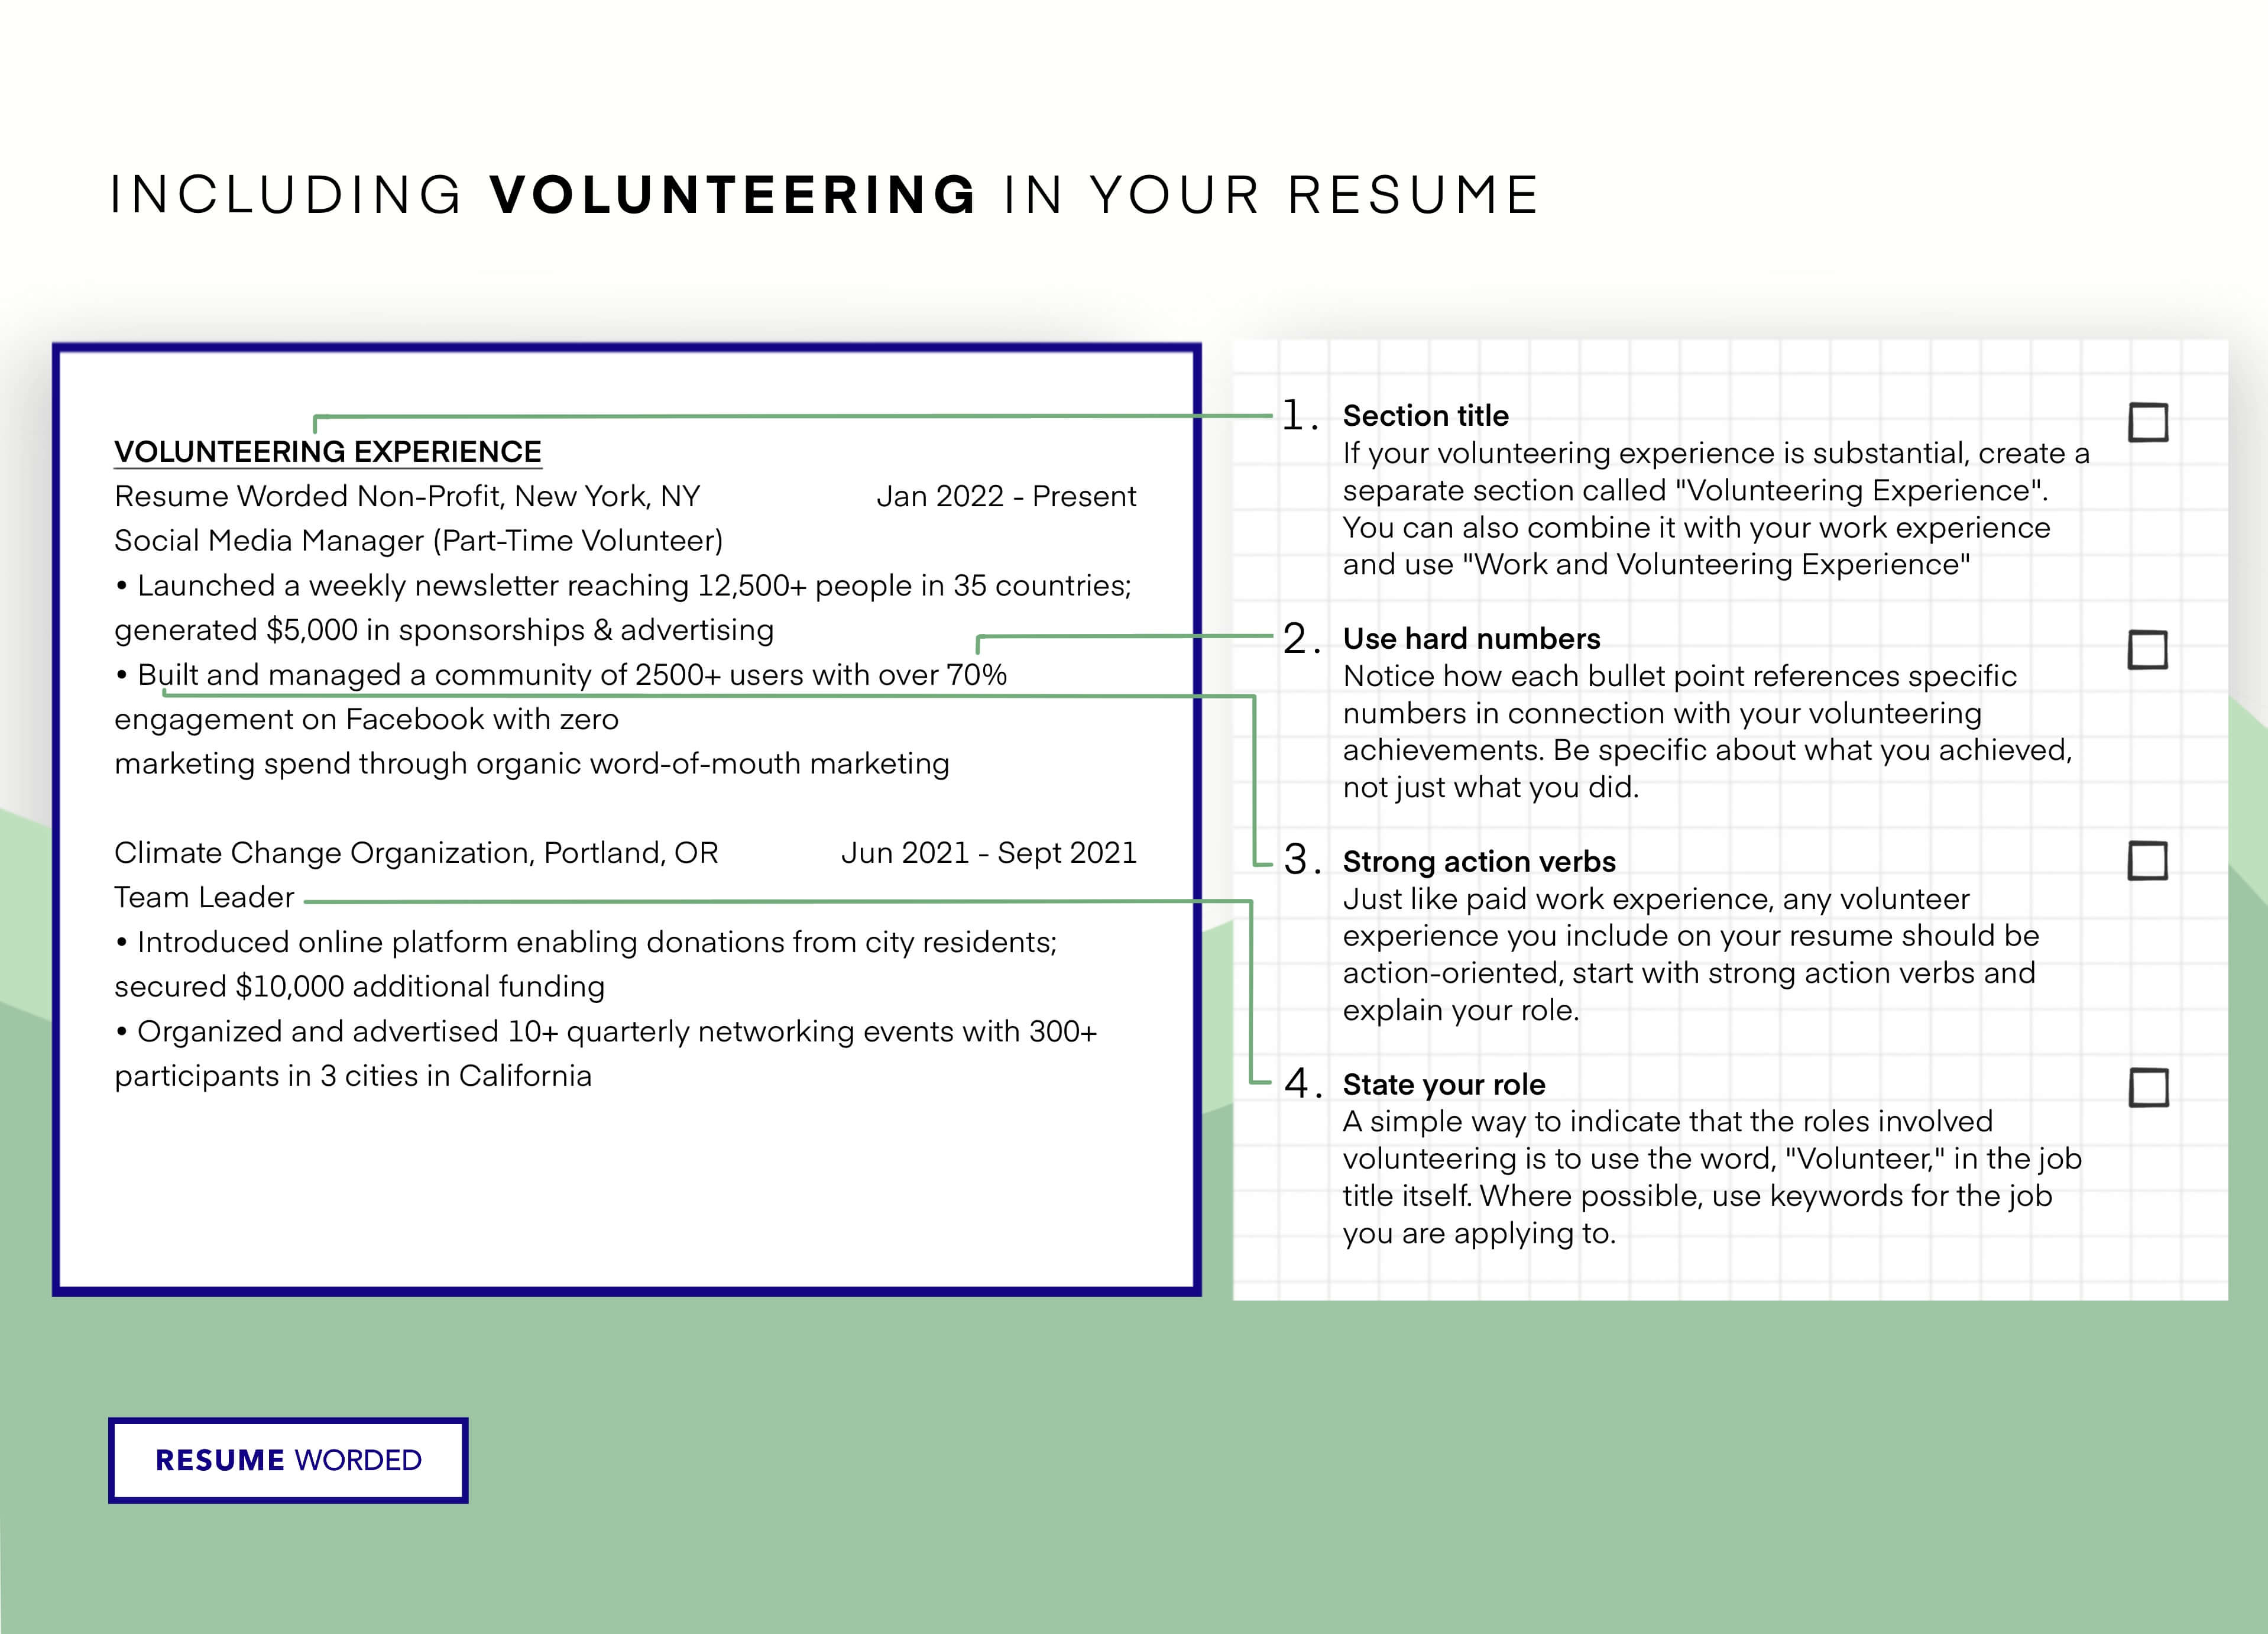 Include your volunteering experience. - Entry Level Intelligence Analyst Resume